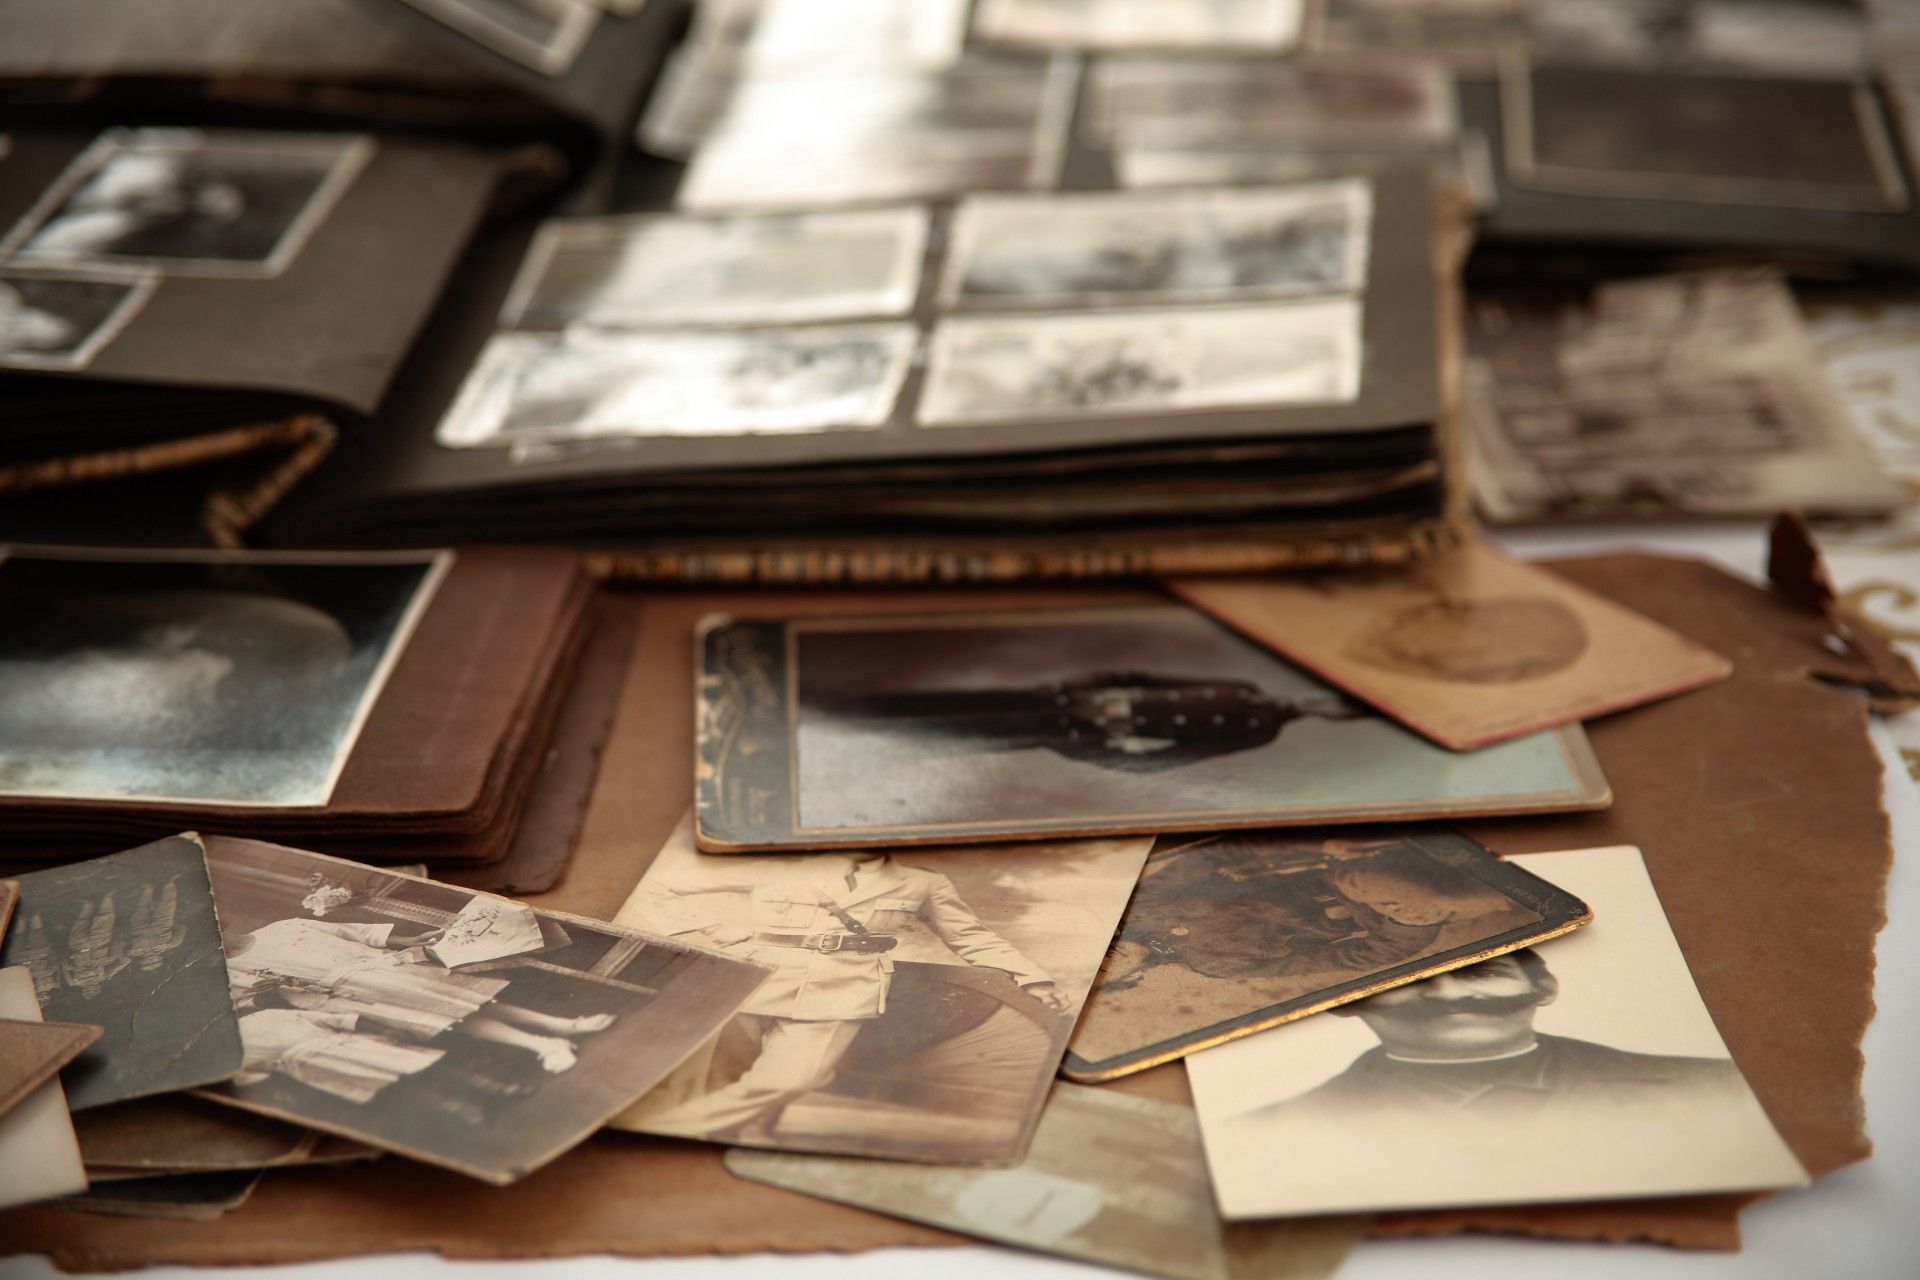 Old photos and photo albums are spread out on a table